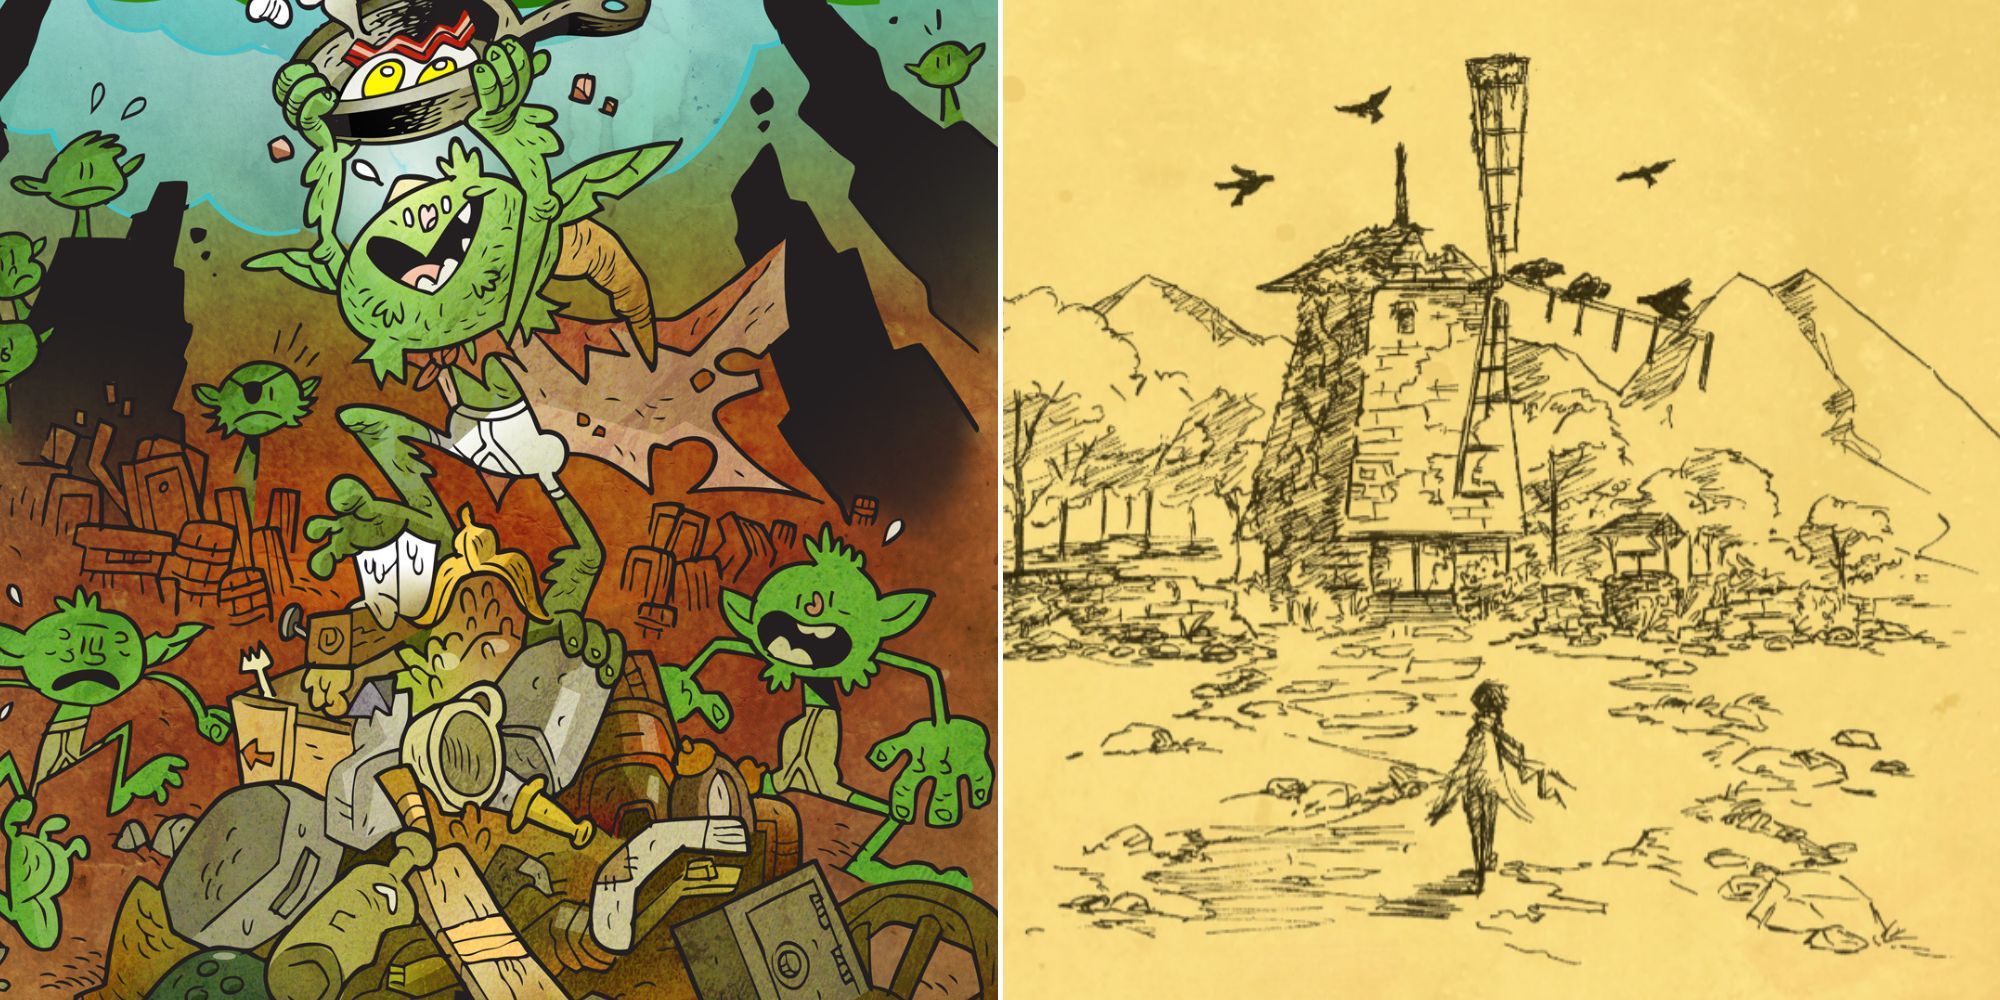 Goblin Quest Cover Art Of Goblins Holding Up Breakfast and The Quiet Year Cover Art Of A Old Windmill